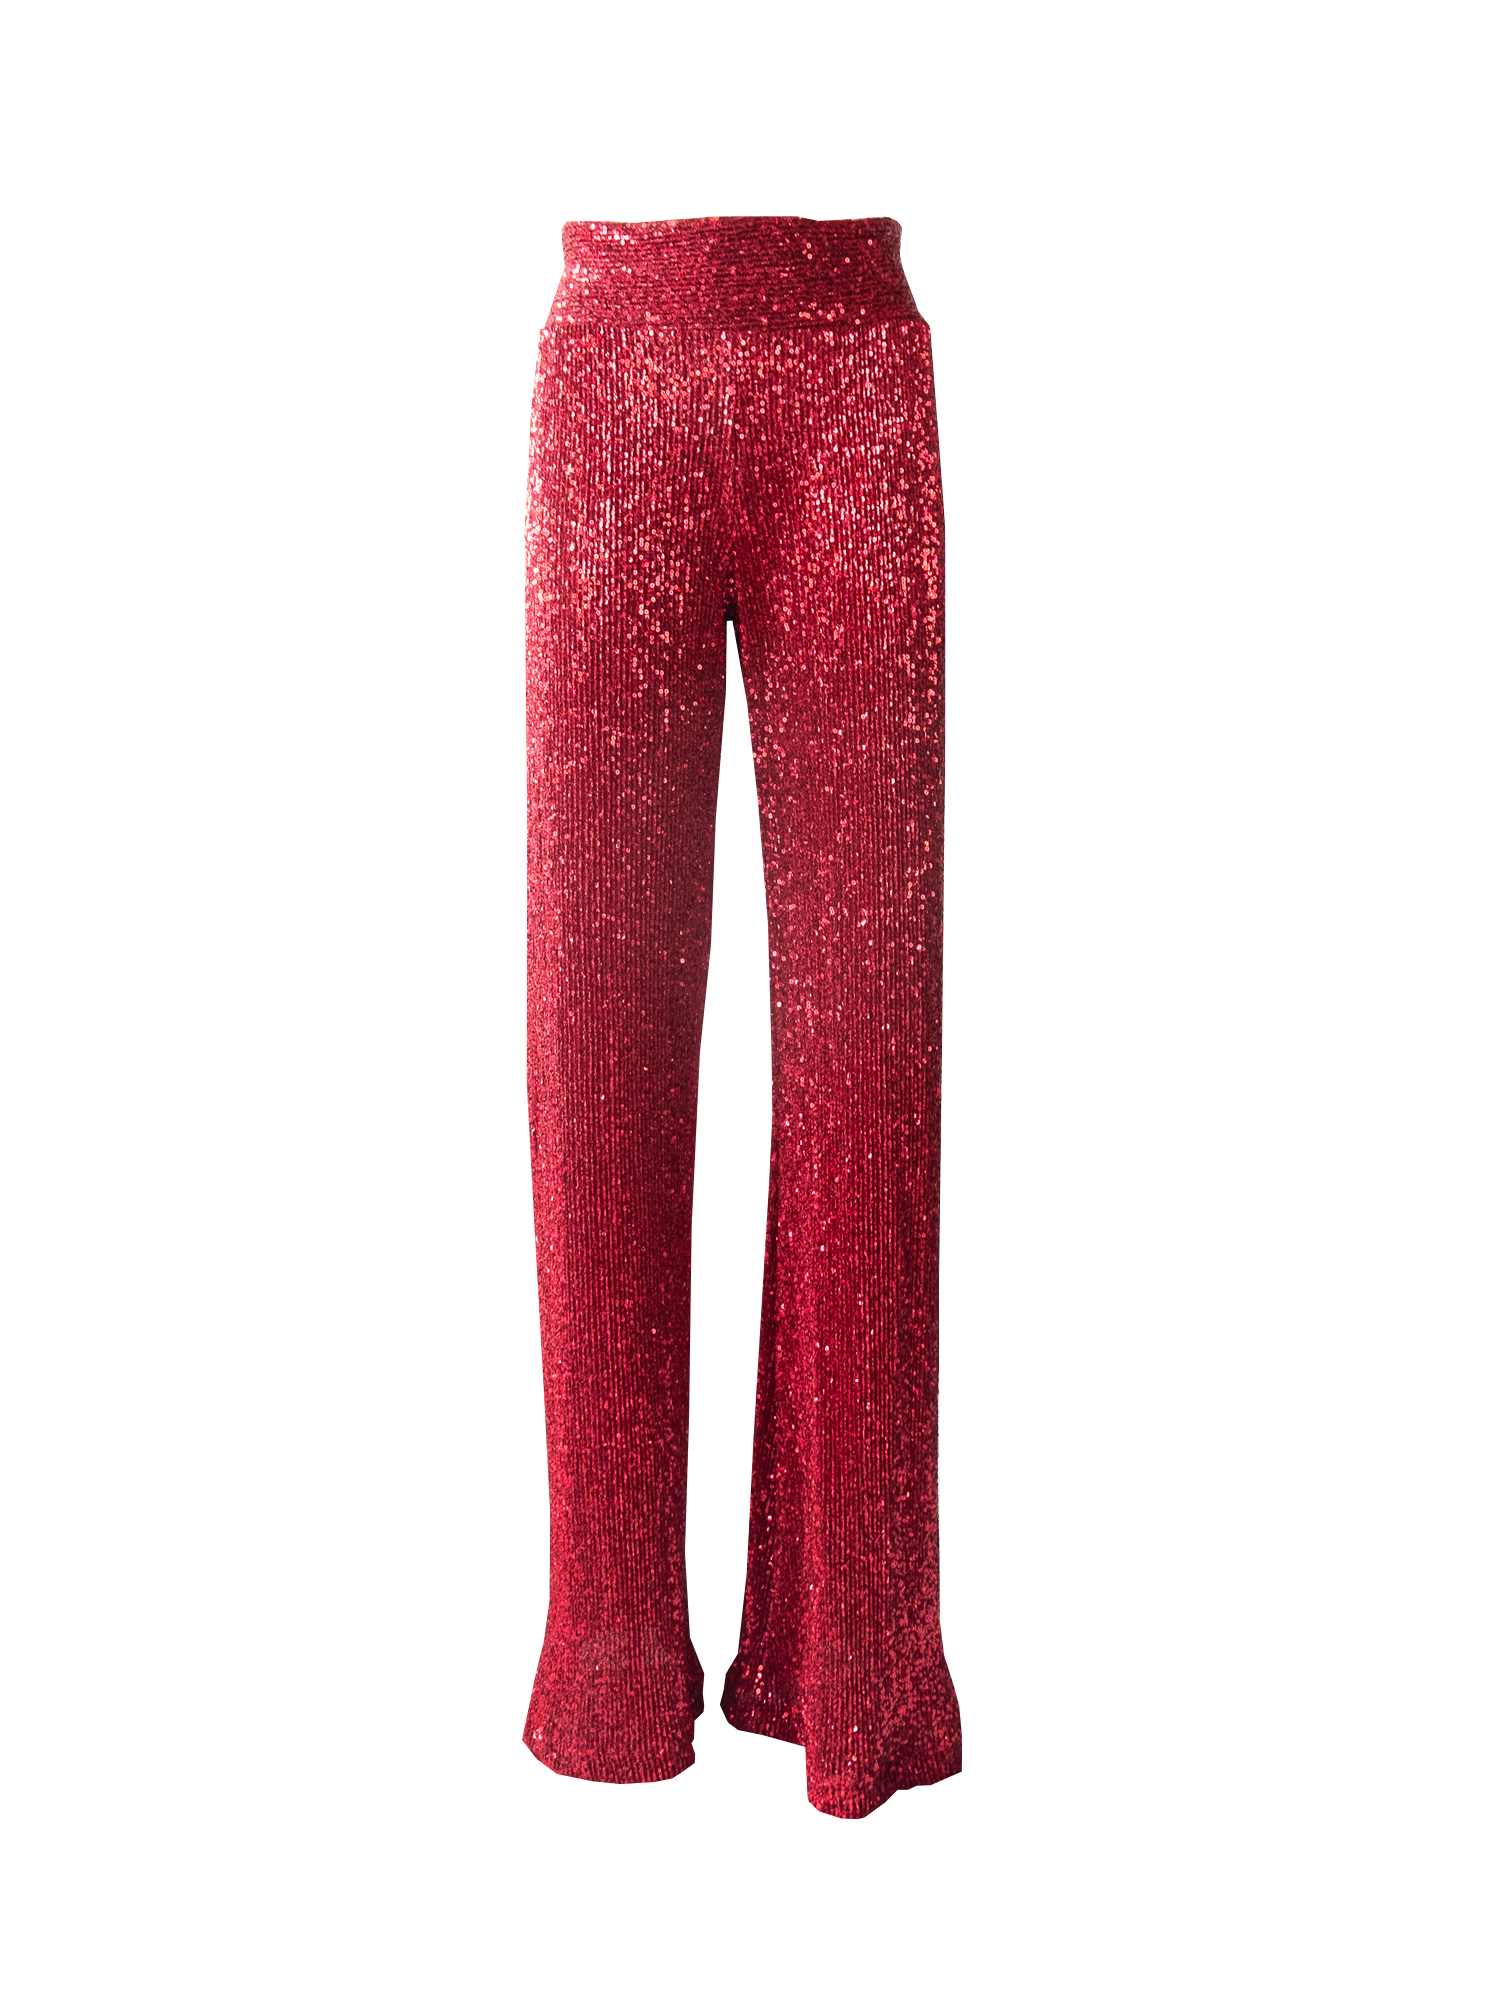 MIMI - trousers in red sequin